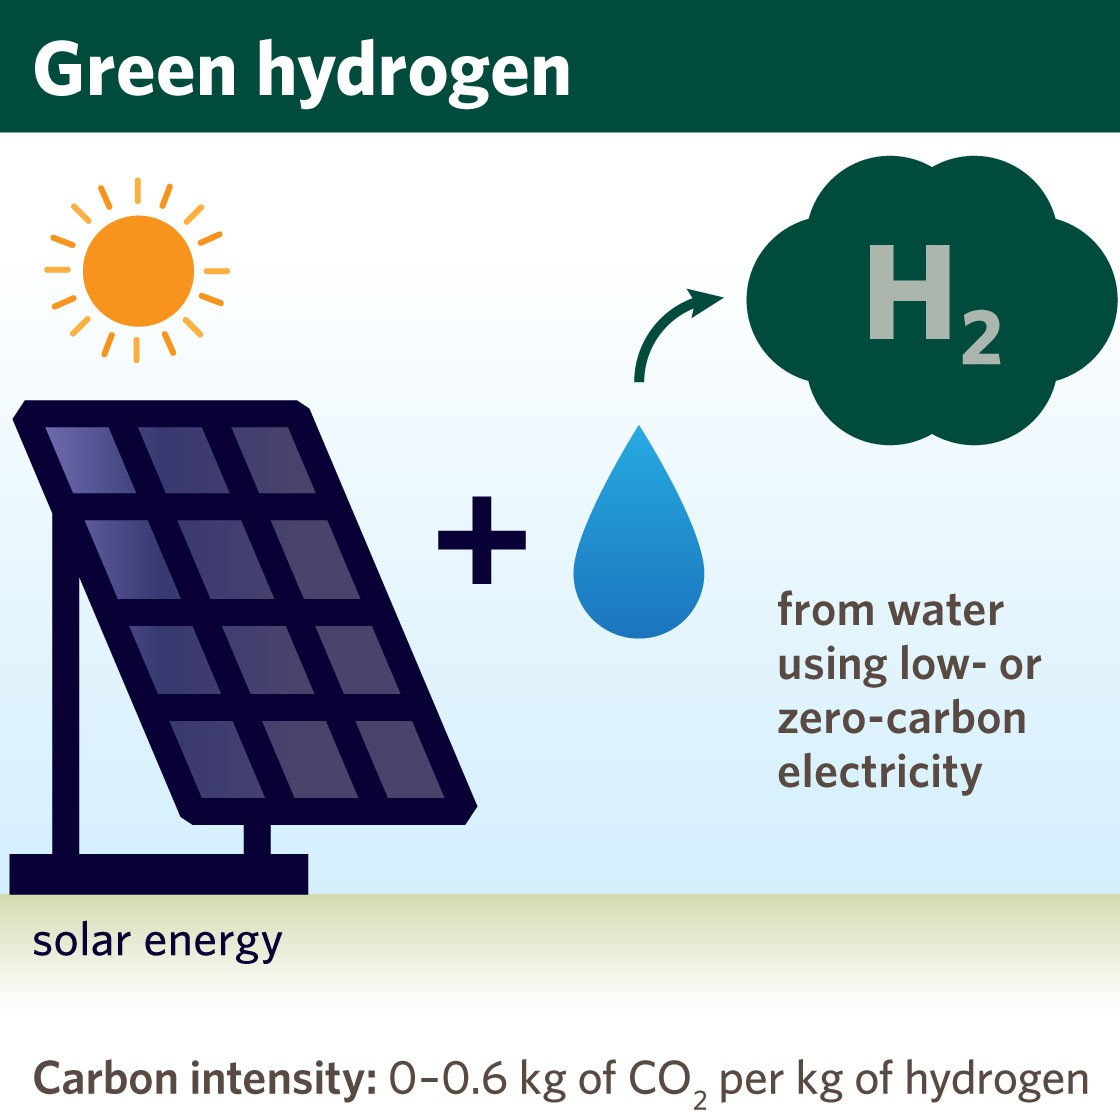 Green hydrogen illustration. Green hydrogen is produced from water using low- or zero-carbon electricity sources, like solar energy. This method of producing hydrogen creates 0-0.6 kg of carbon dioxide per kg of hydrogen..